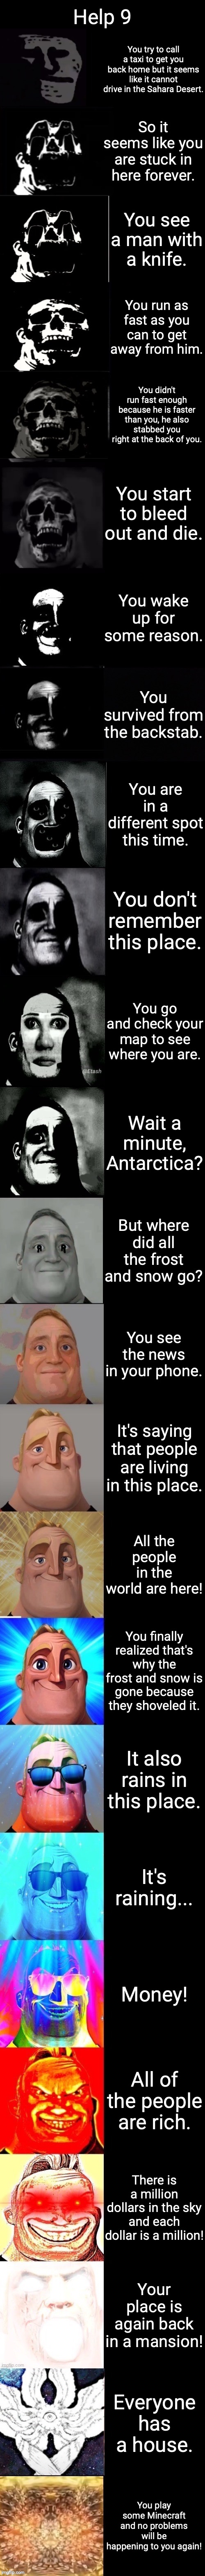 Help 9 (There might be Help 10 if you all give me what mr incredible template I should use) | Help 9; You try to call a taxi to get you back home but it seems like it cannot drive in the Sahara Desert. So it seems like you are stuck in here forever. You see a man with a knife. You run as fast as you can to get away from him. You didn't run fast enough because he is faster than you, he also stabbed you right at the back of you. You start to bleed out and die. You wake up for some reason. You survived from the backstab. You are in a different spot this time. You don't remember this place. You go and check your map to see where you are. Wait a minute, Antarctica? But where did all the frost and snow go? You see the news in your phone. It's saying that people are living in this place. All the people in the world are here! You finally realized that's why the frost and snow is gone because they shoveled it. It also rains in this place. It's raining... Money! All of the people are rich. There is a million dollars in the sky and each dollar is a million! Your place is again back in a mansion! Everyone has a house. You play some Minecraft and no problems will be happening to you again! | image tagged in mr incredible becoming trollge to god updated | made w/ Imgflip meme maker